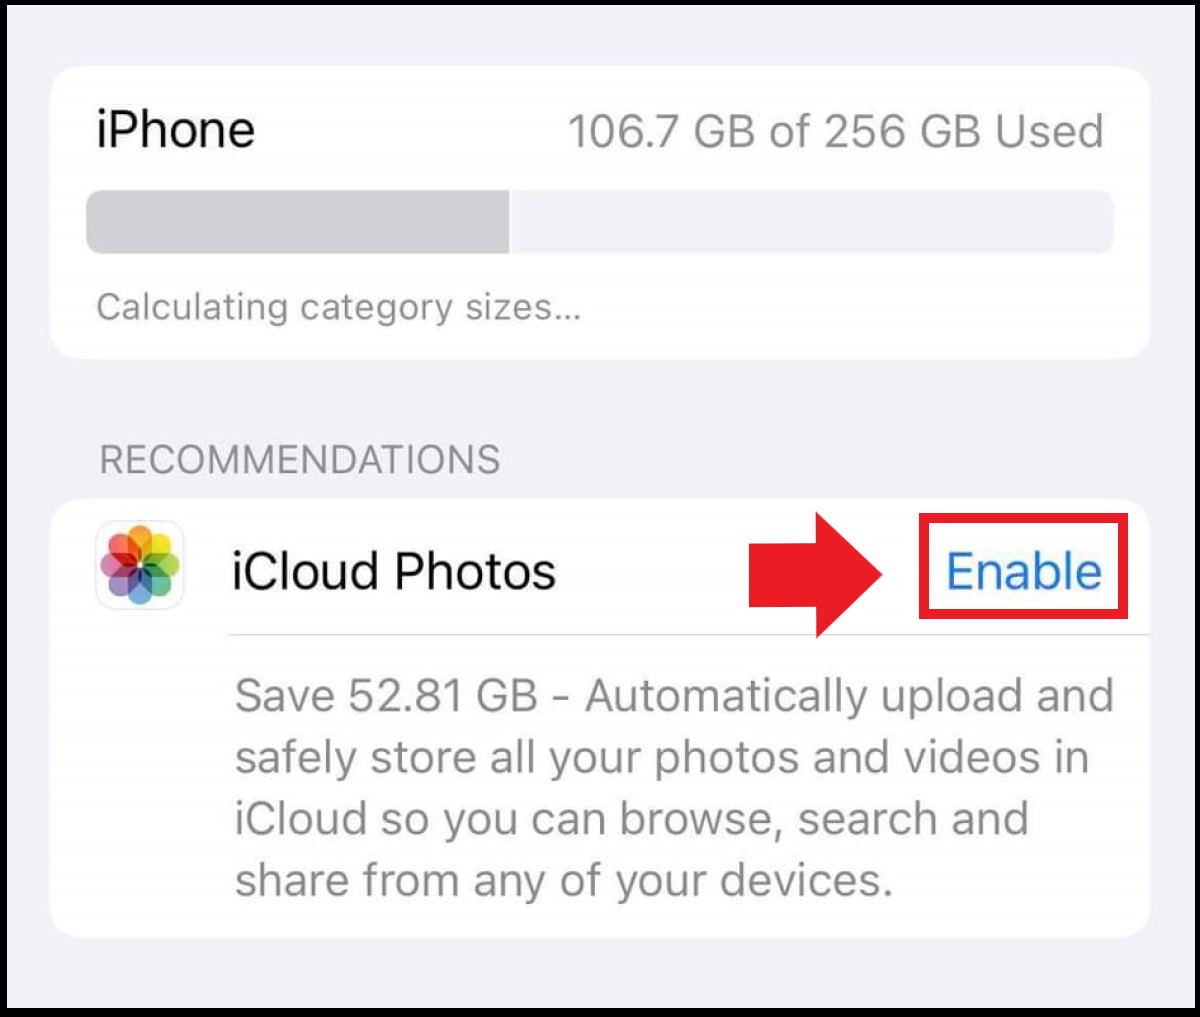 Screenshot of the iCloud Photos feature on an iPhone